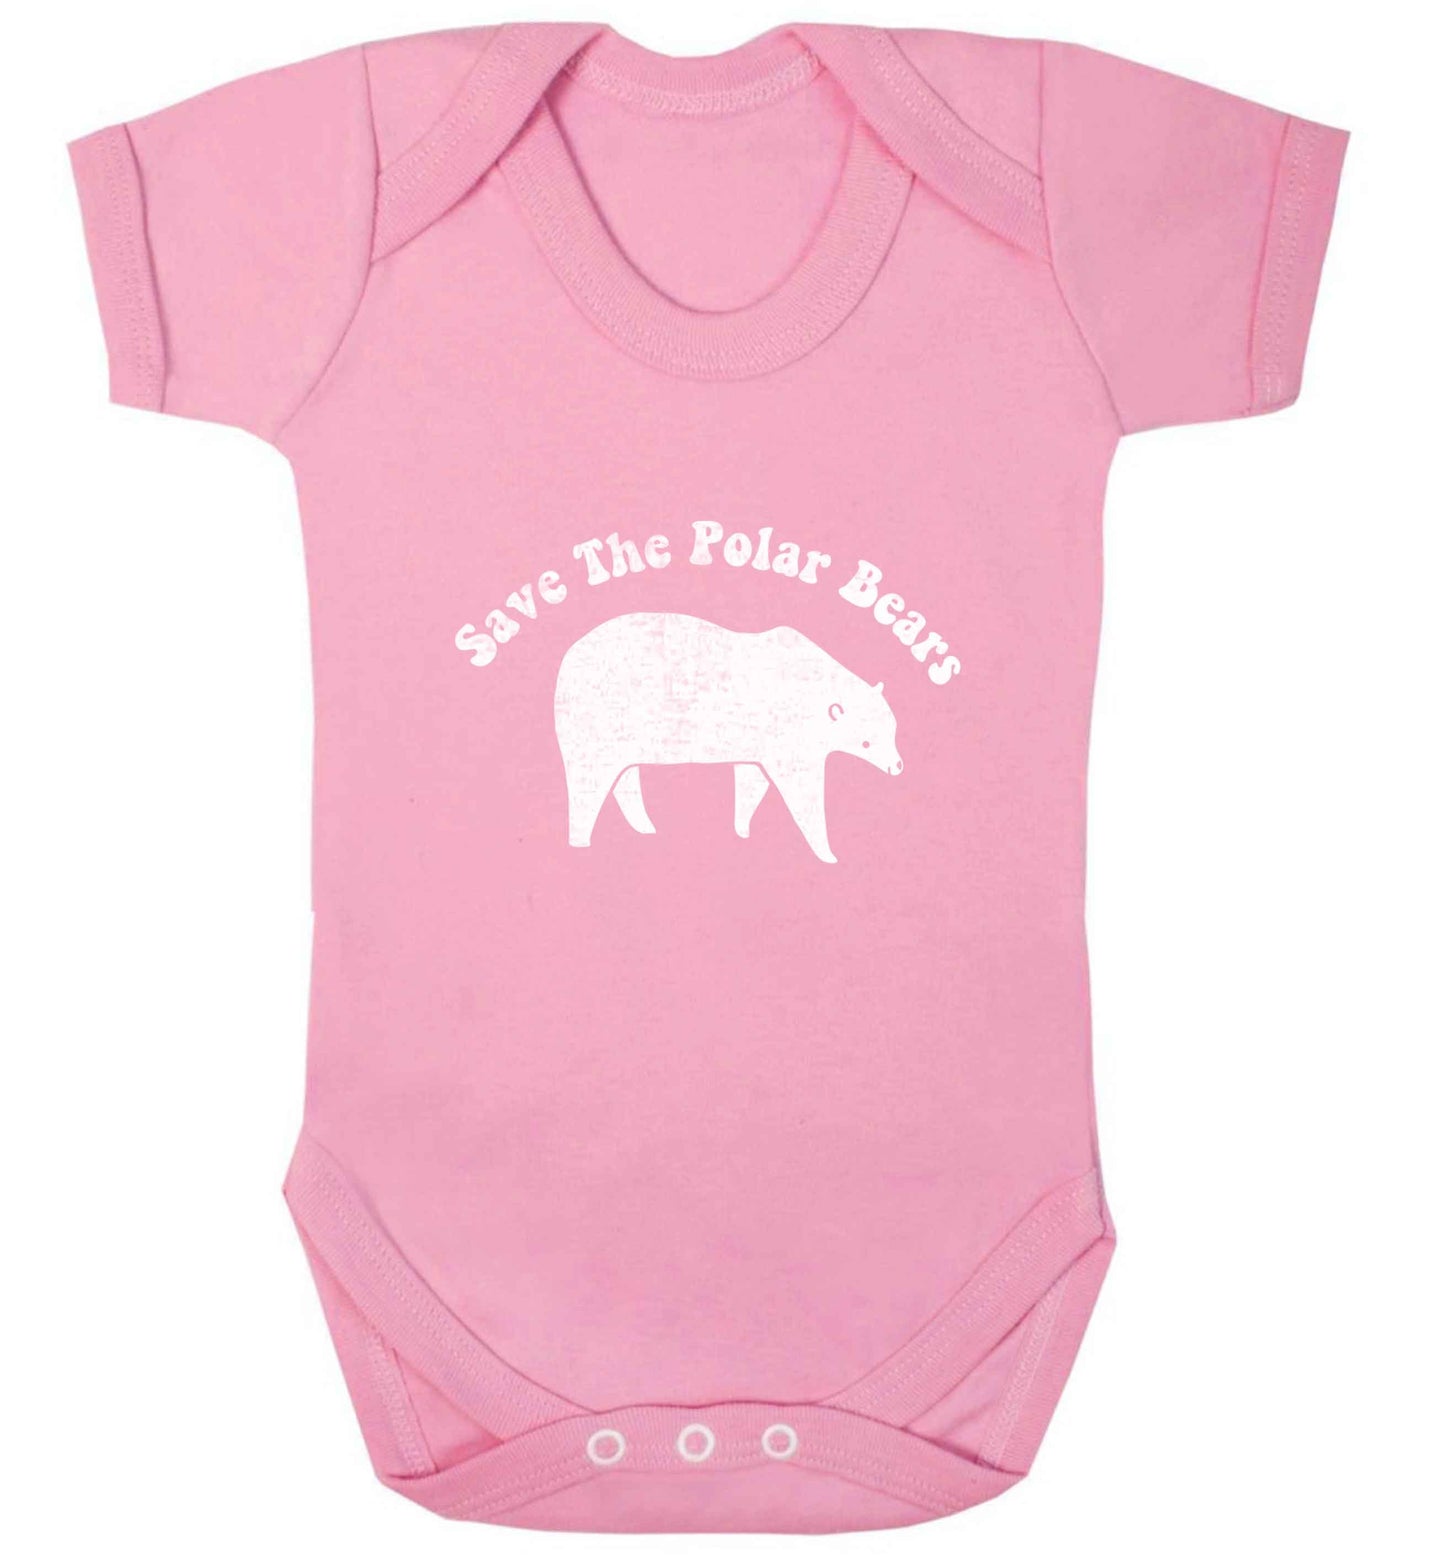 Save The Polar Bears baby vest pale pink 18-24 months